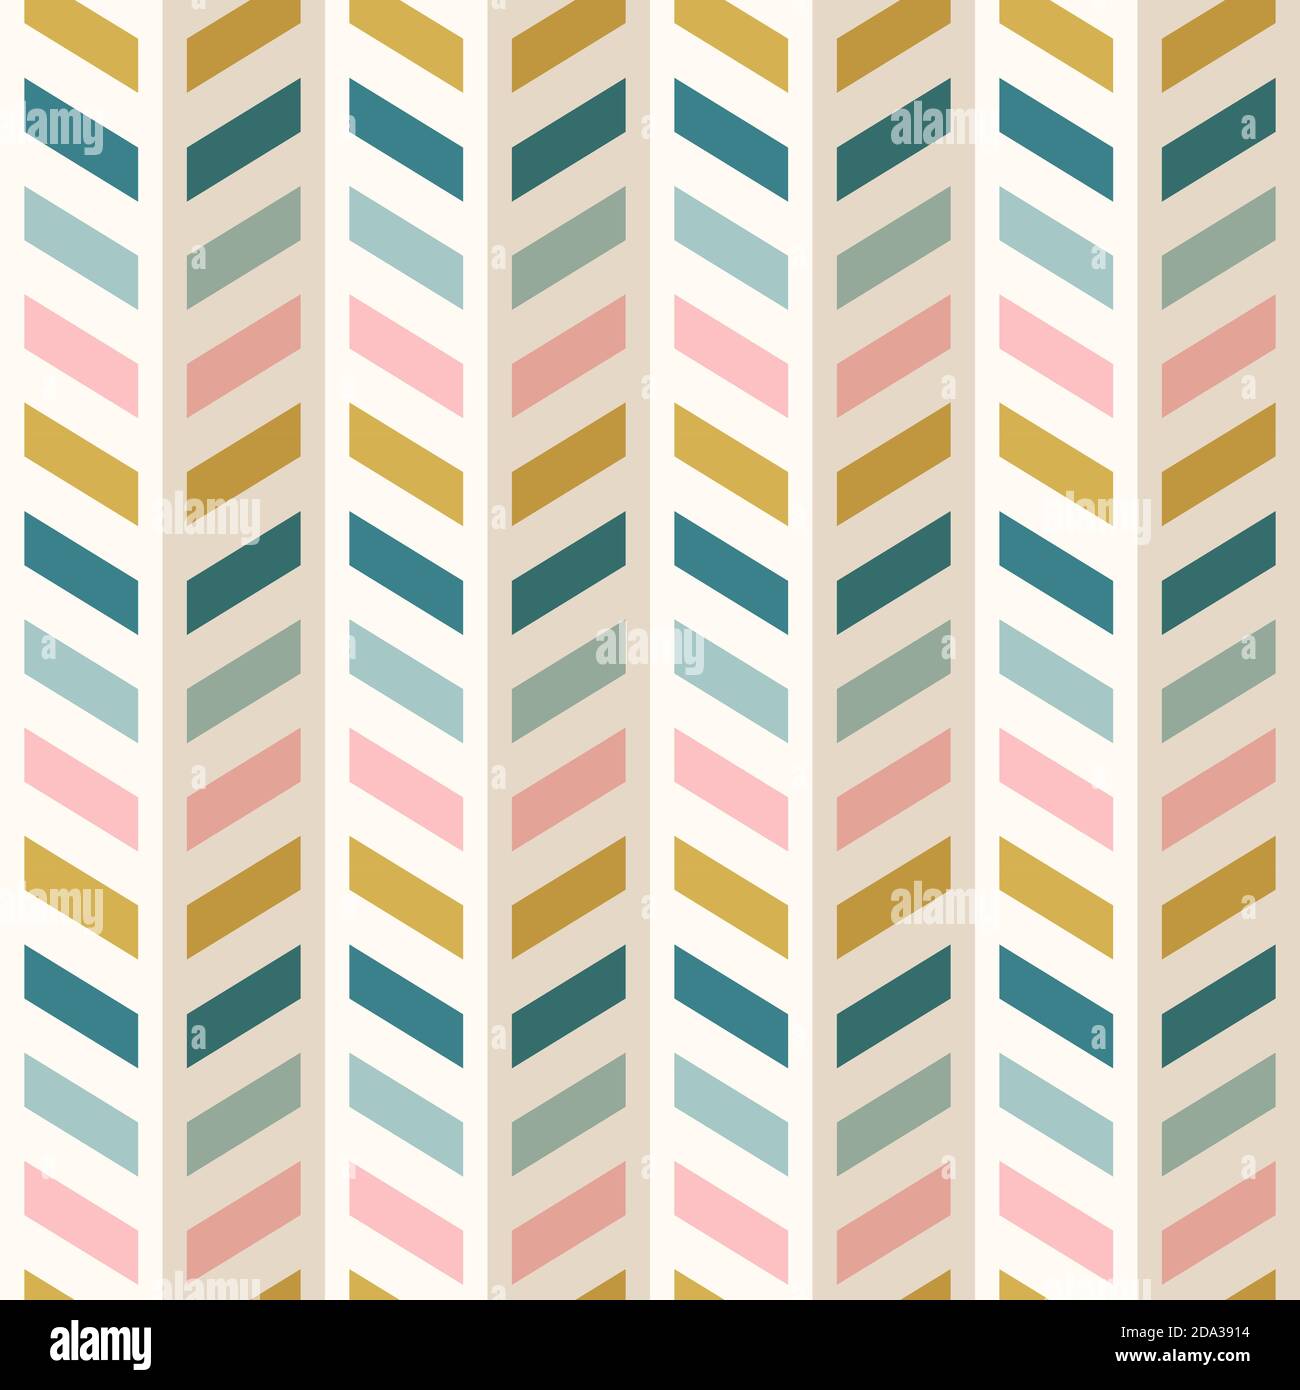 Fashion abstract geometric chevron pattern. Seamless vector background. Teal, mint, pink, mustard yellow retro mid century colors. Fashion fabric or w Stock Vector